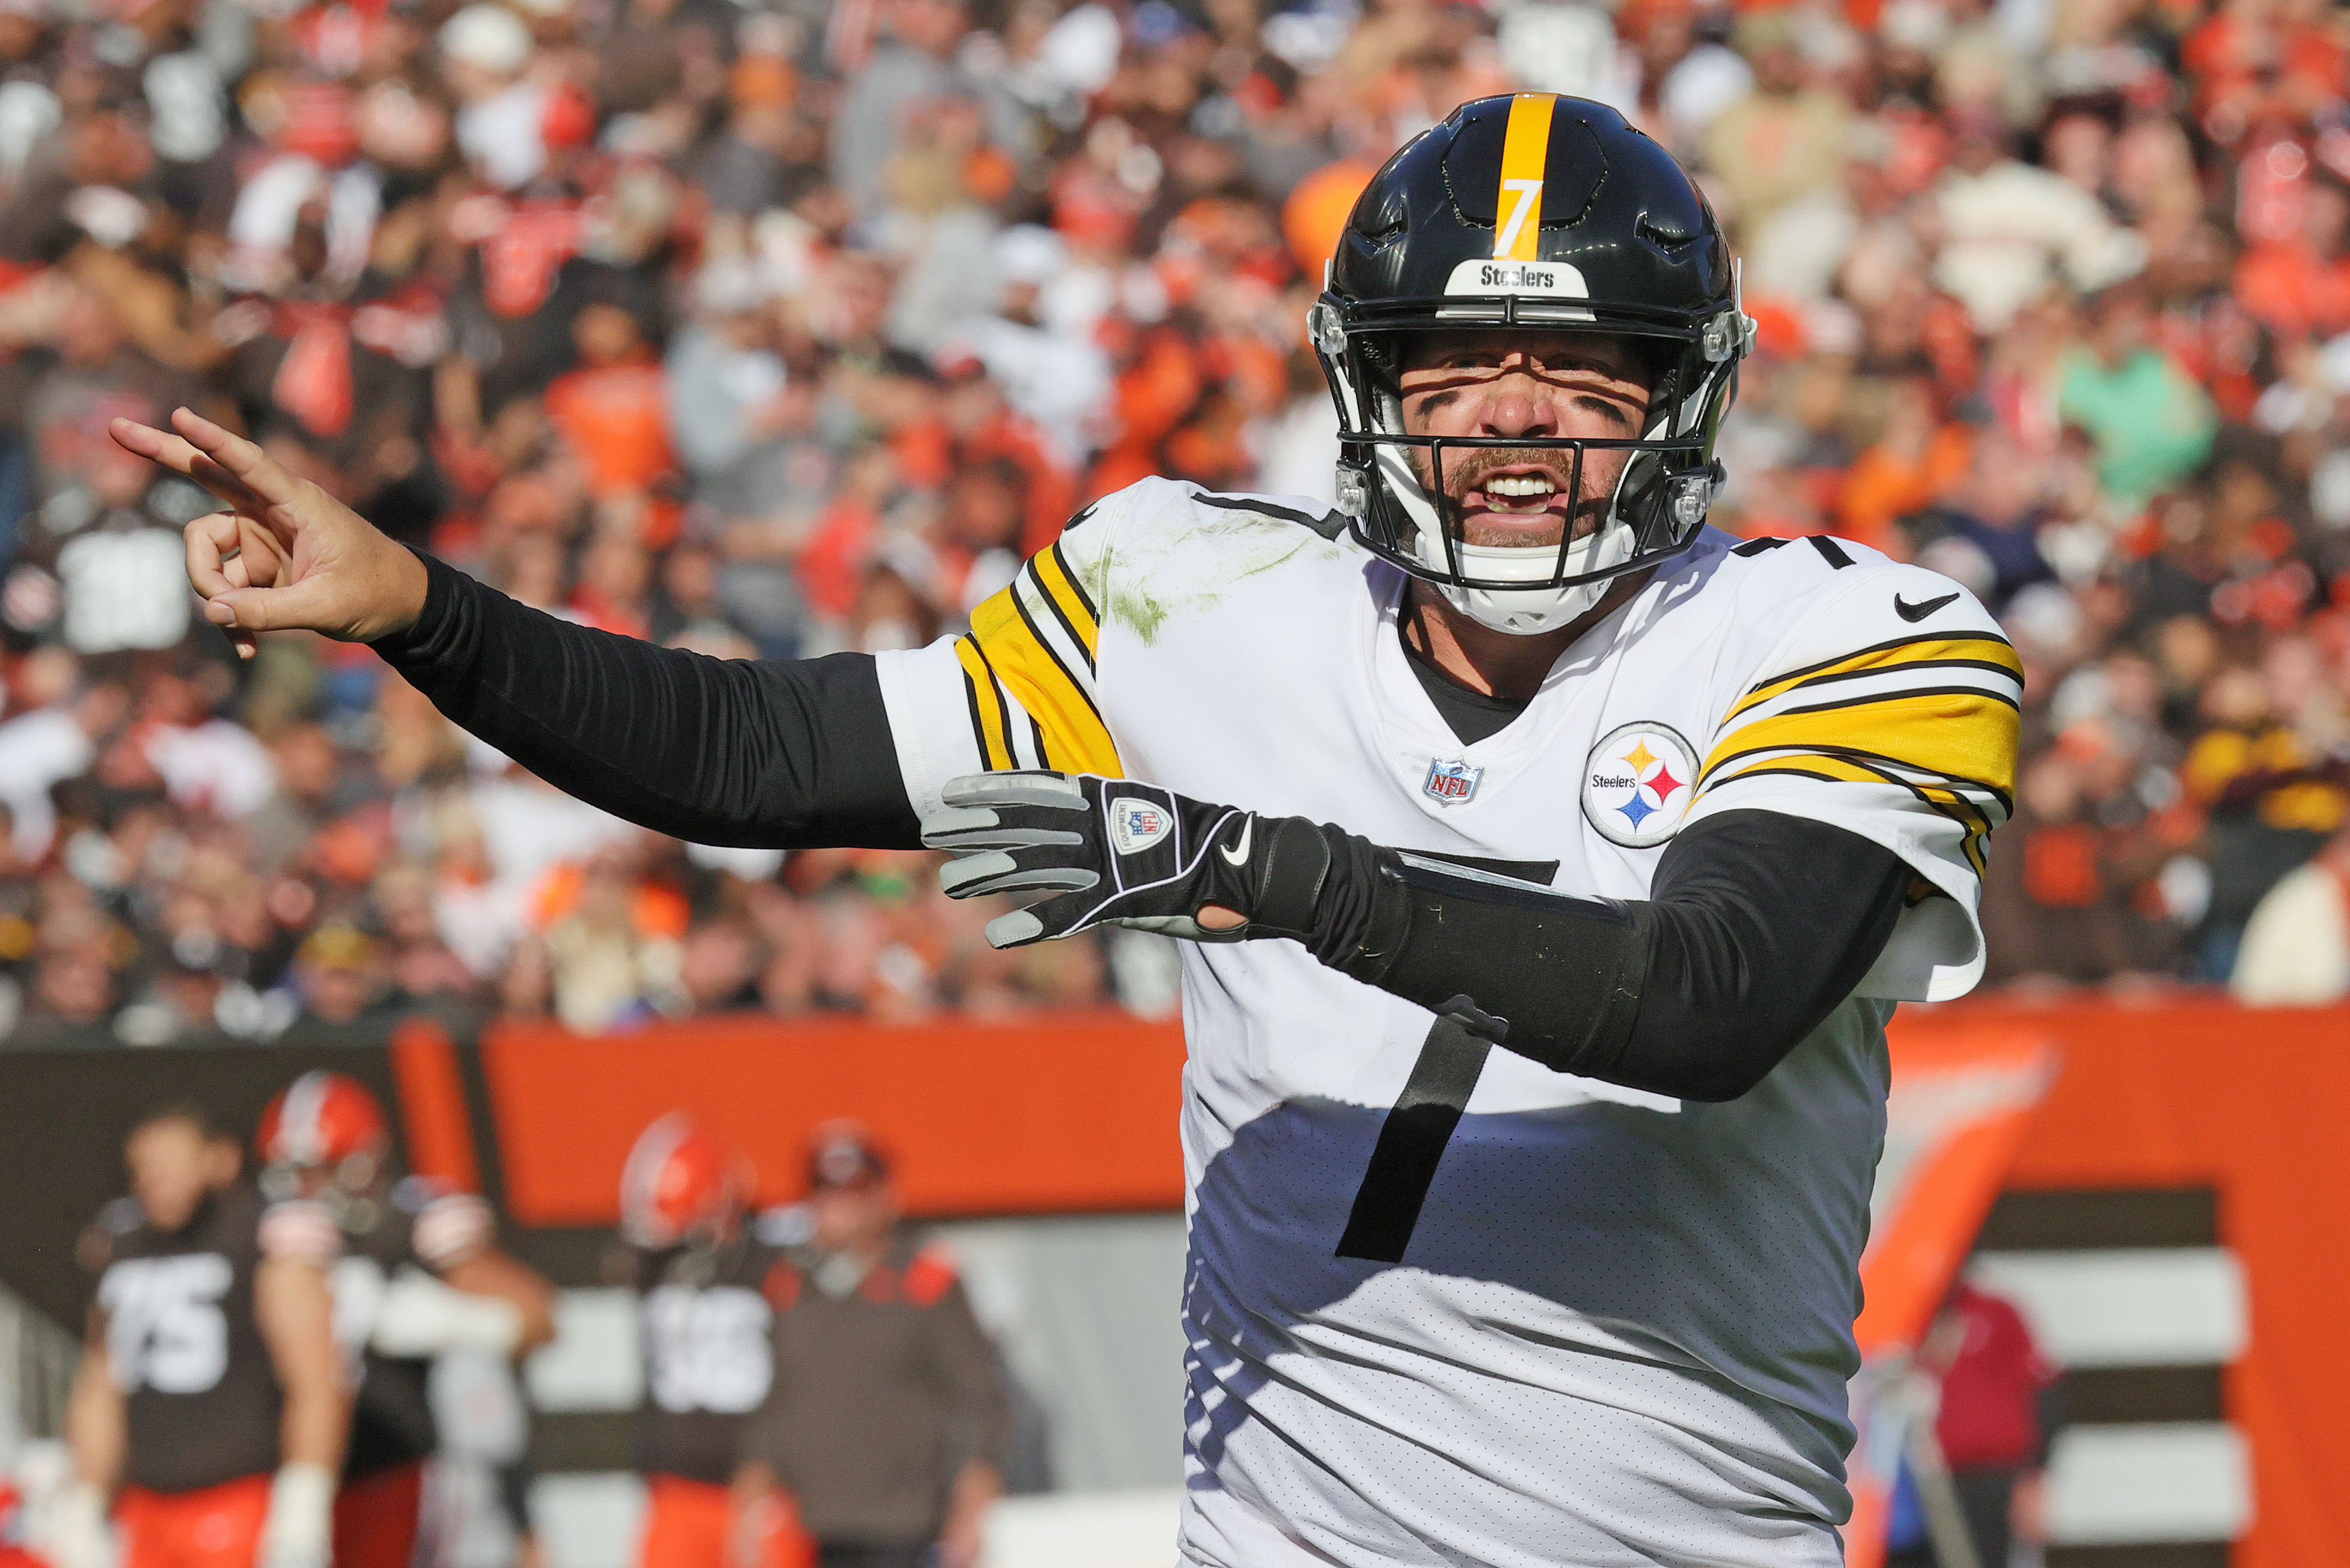 Browns will face Ben Roethlisberger in what he admitted Thursday